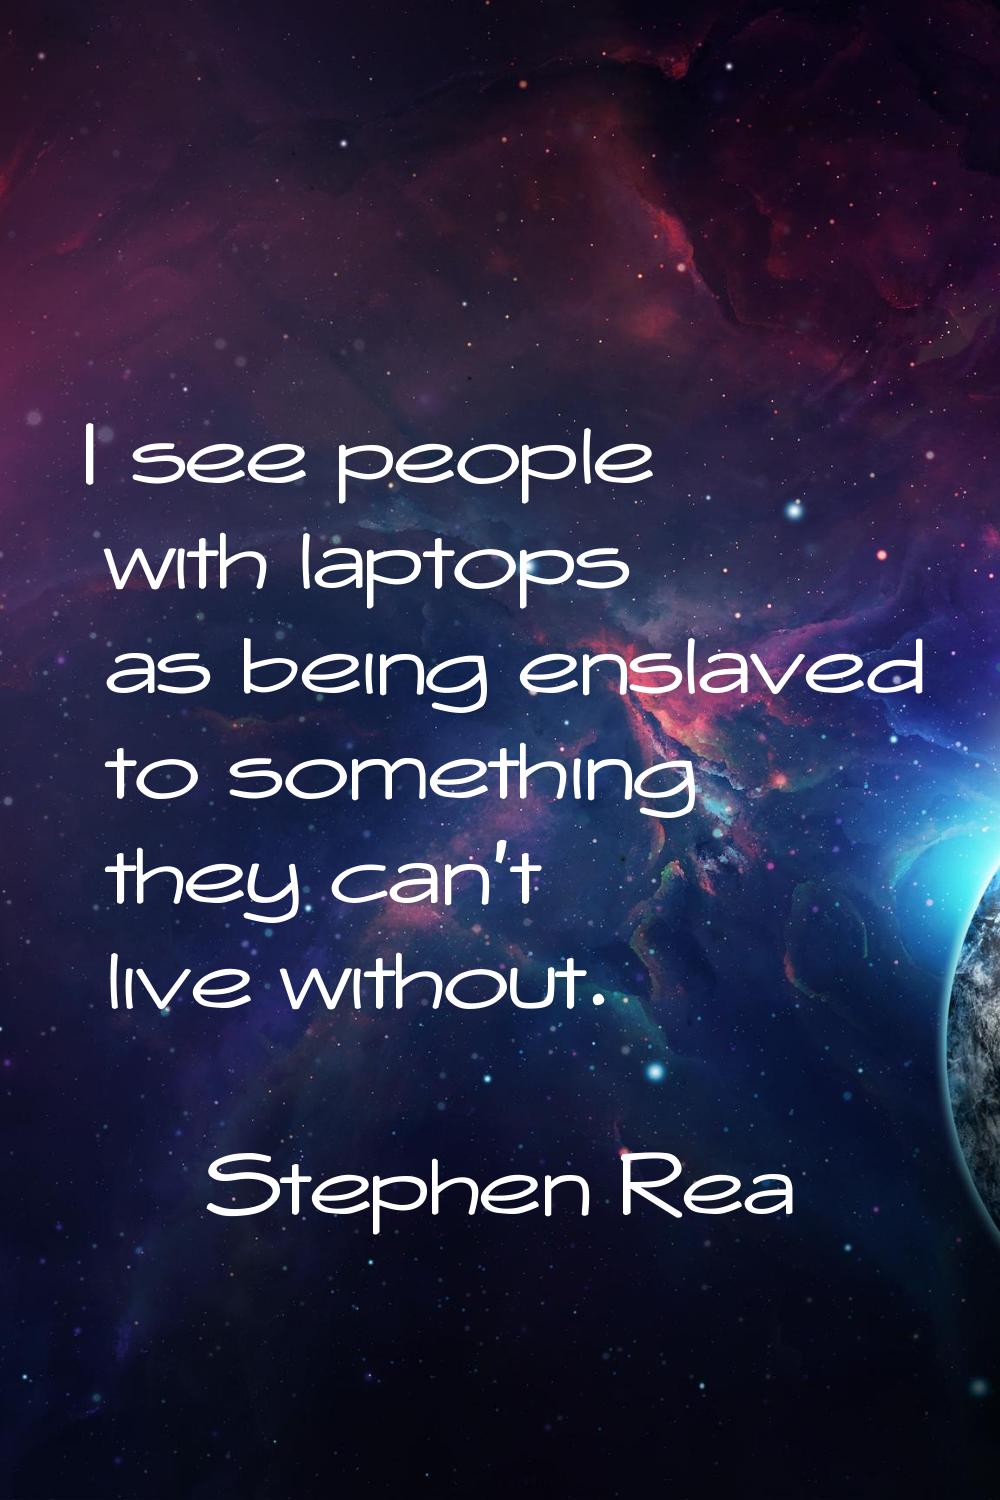 I see people with laptops as being enslaved to something they can't live without.